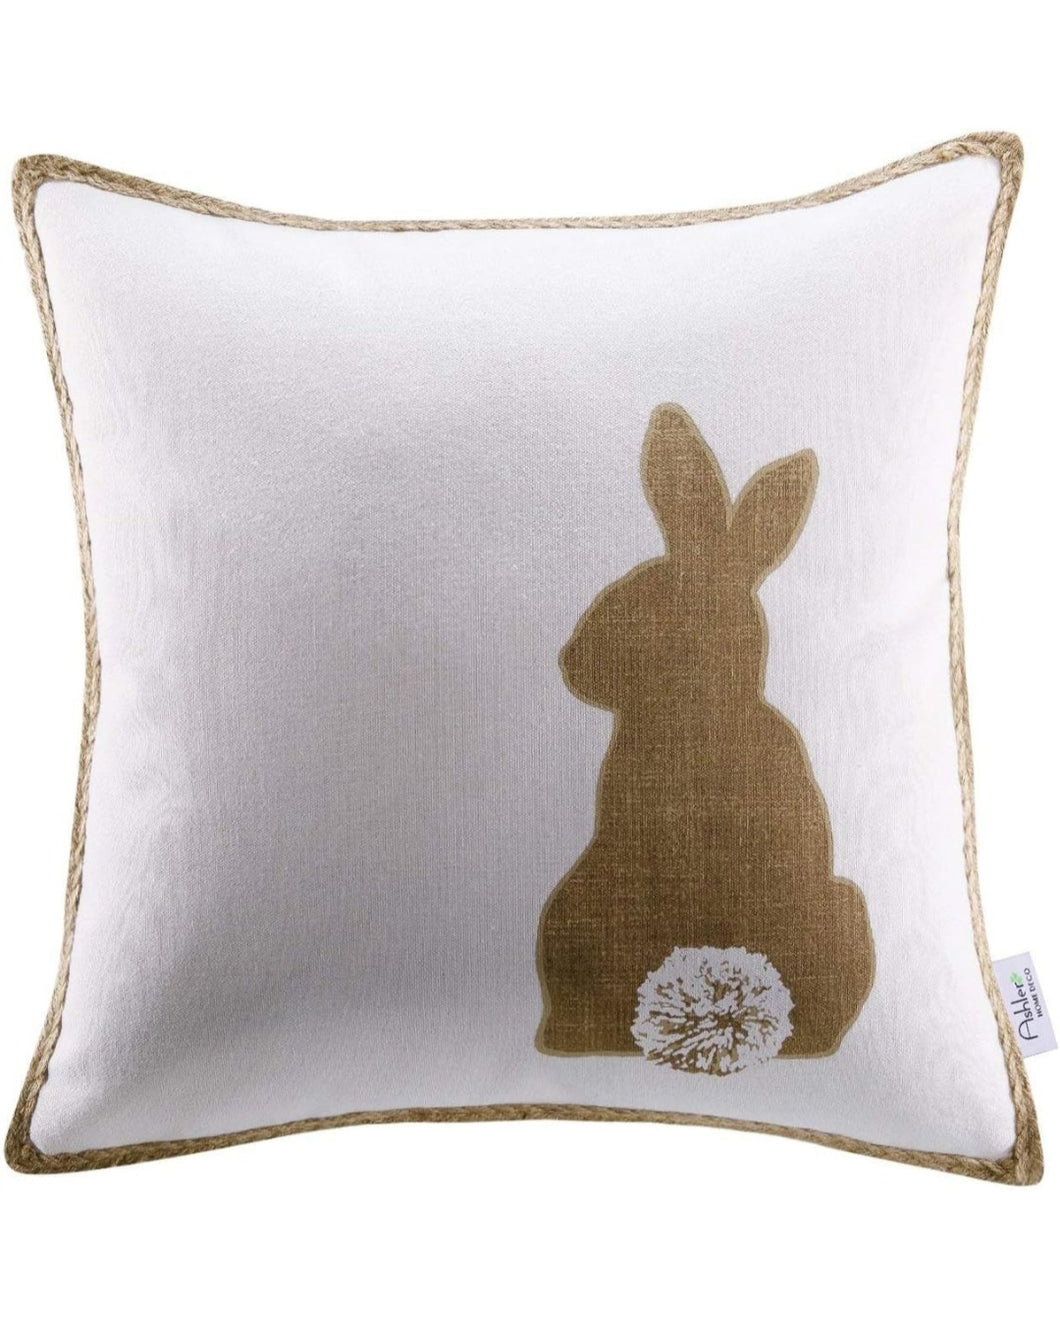 Brown Rope Bunny Pillow Cover